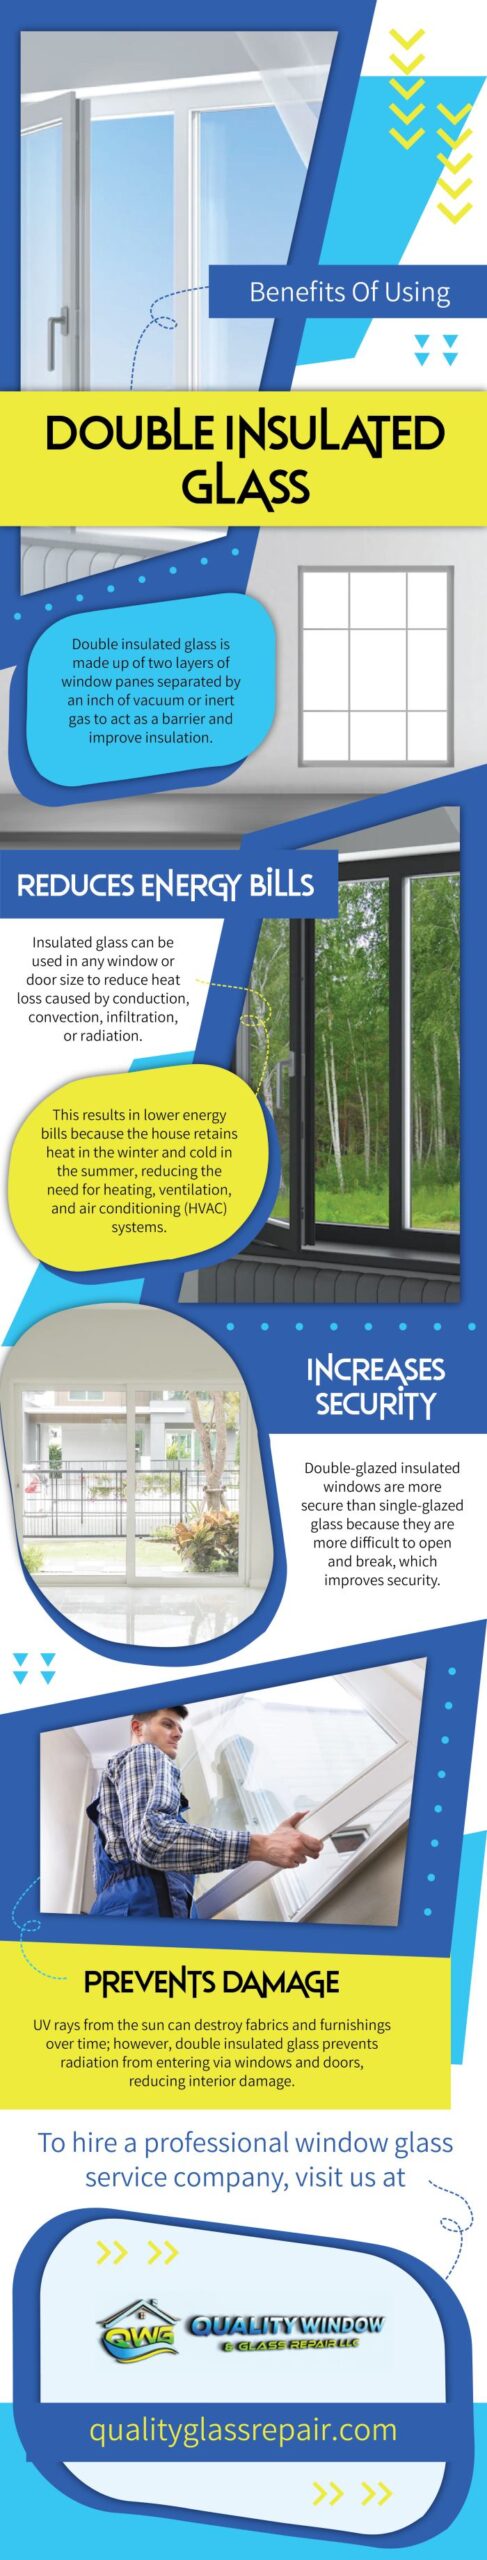 Benefits of Using Double Insulated Glass